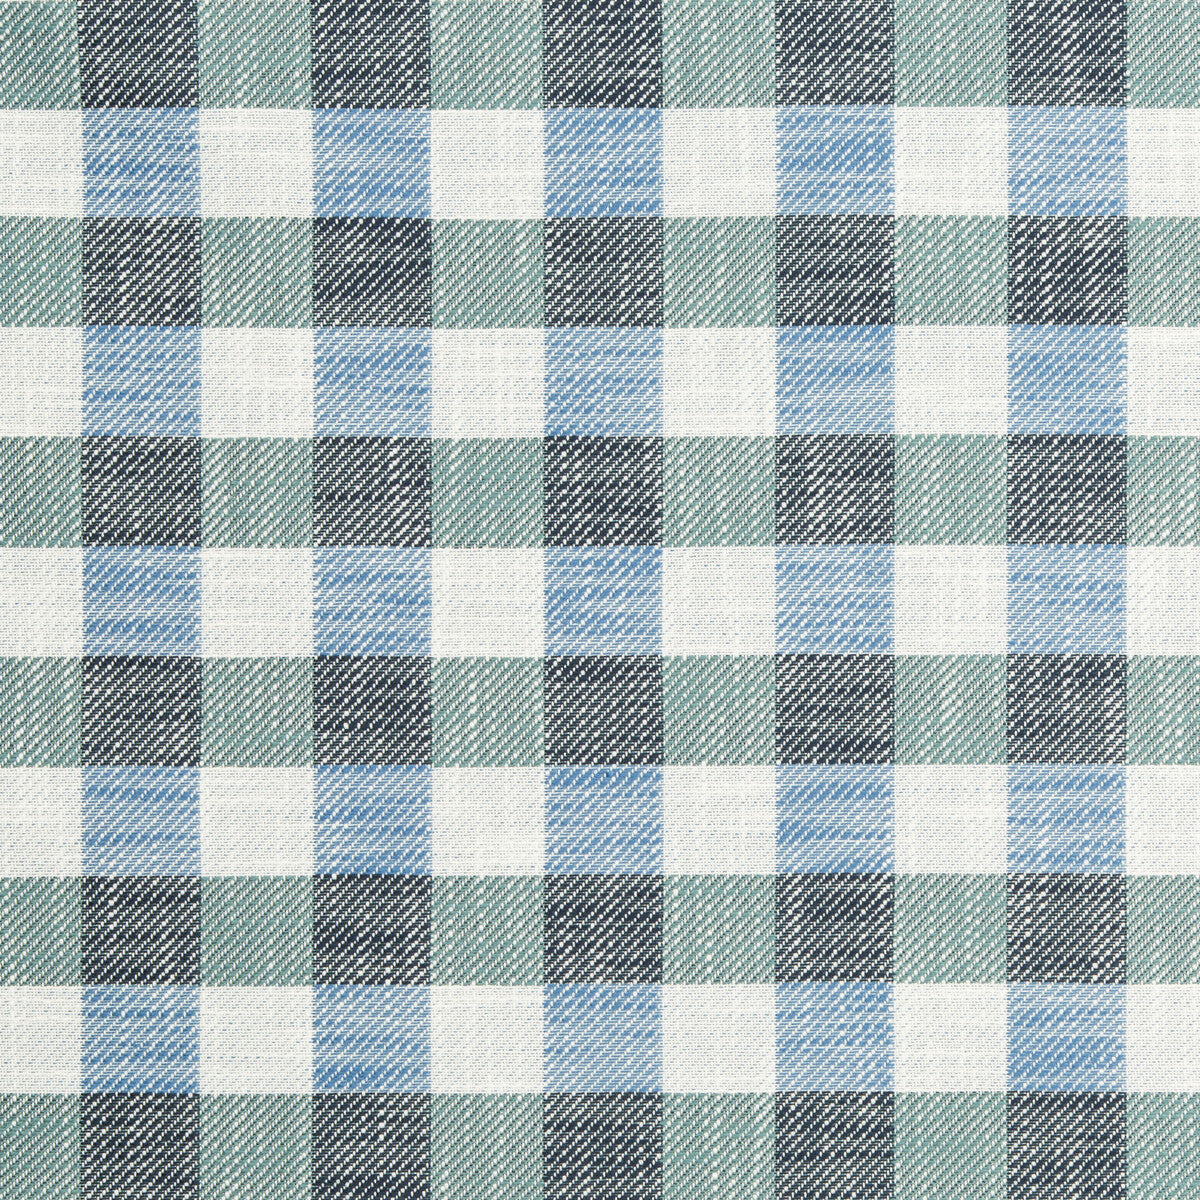 Kf Ctr fabric - pattern 35884.5.0 - by Kravet Contract in the Gis Crypton collection